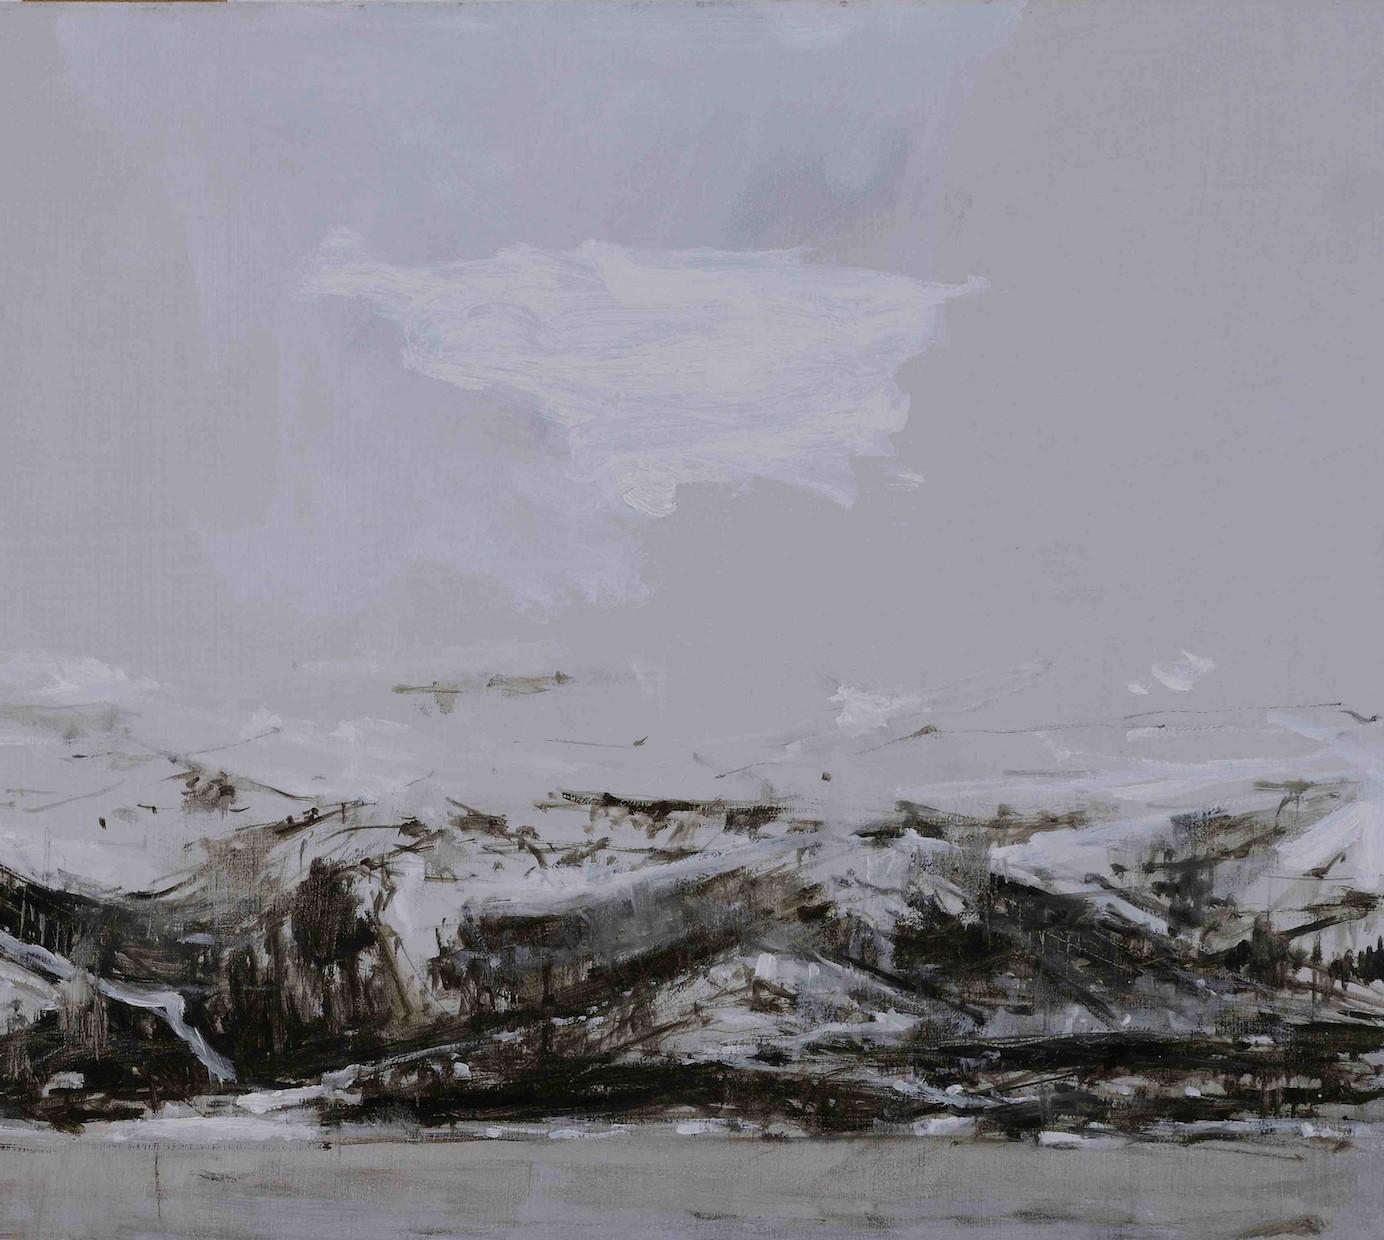 Narvik No. 4 by Calo Carratalá - Landscape painting, snowy mountain, winter For Sale 2